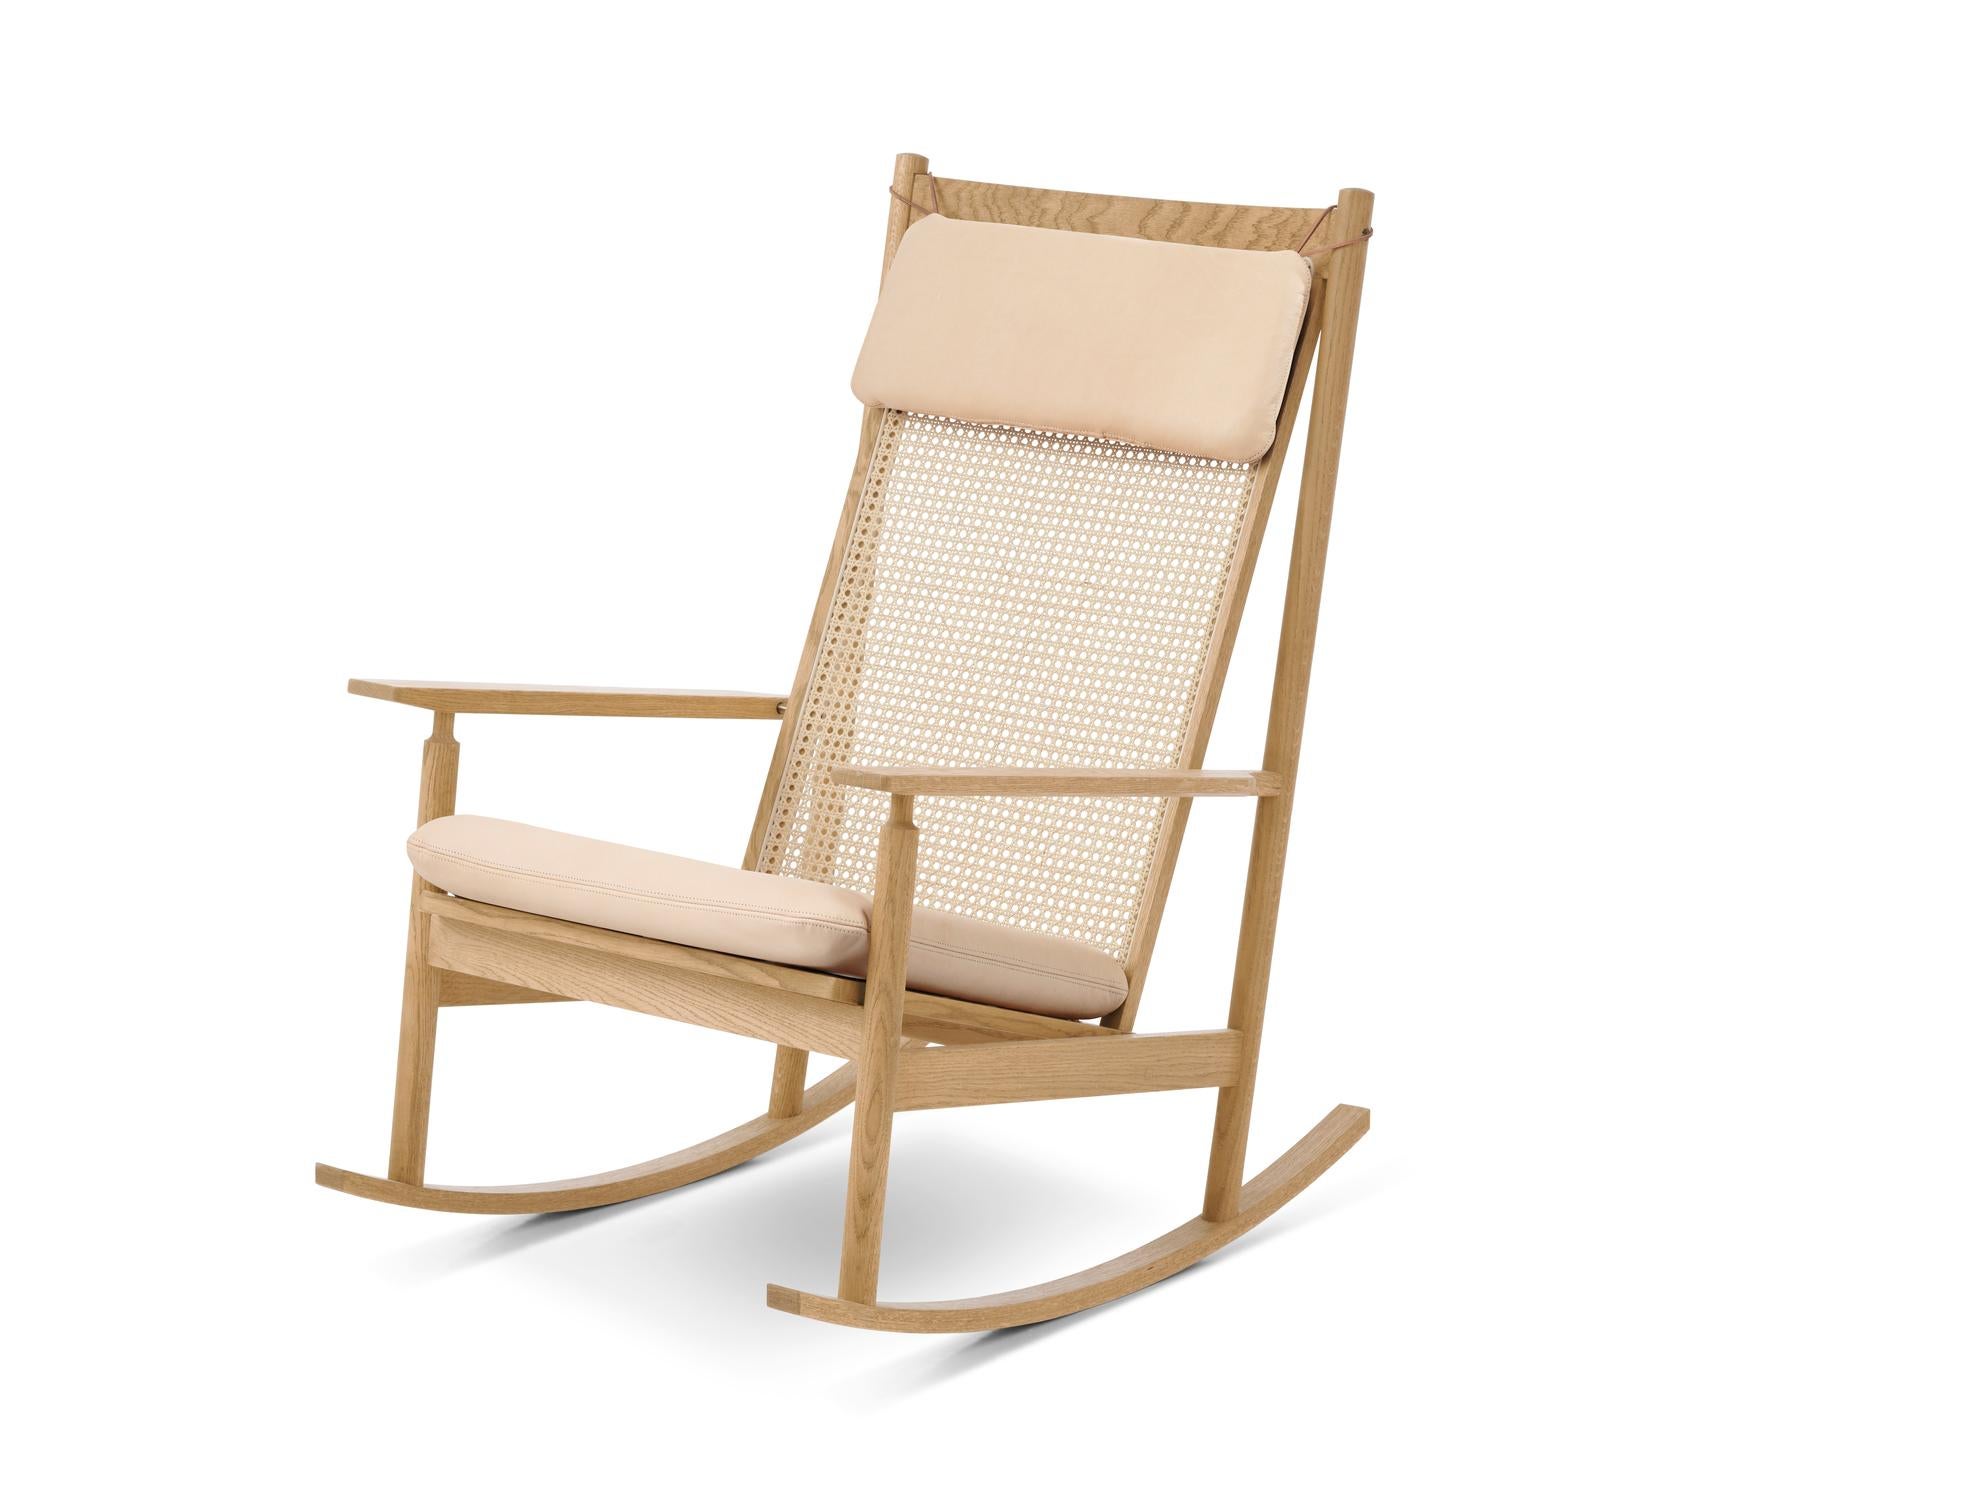 Swing rocking chair Sheepskin teak Drake by Warm Nordic
Dimensions: D 91 x W 68 x H 103 cm
Material: Wood, Foam, Rubber springs, French cane, Textile or leather upholstery, Oak
Weight: 16.5 kg
Also available in different colours, materials and